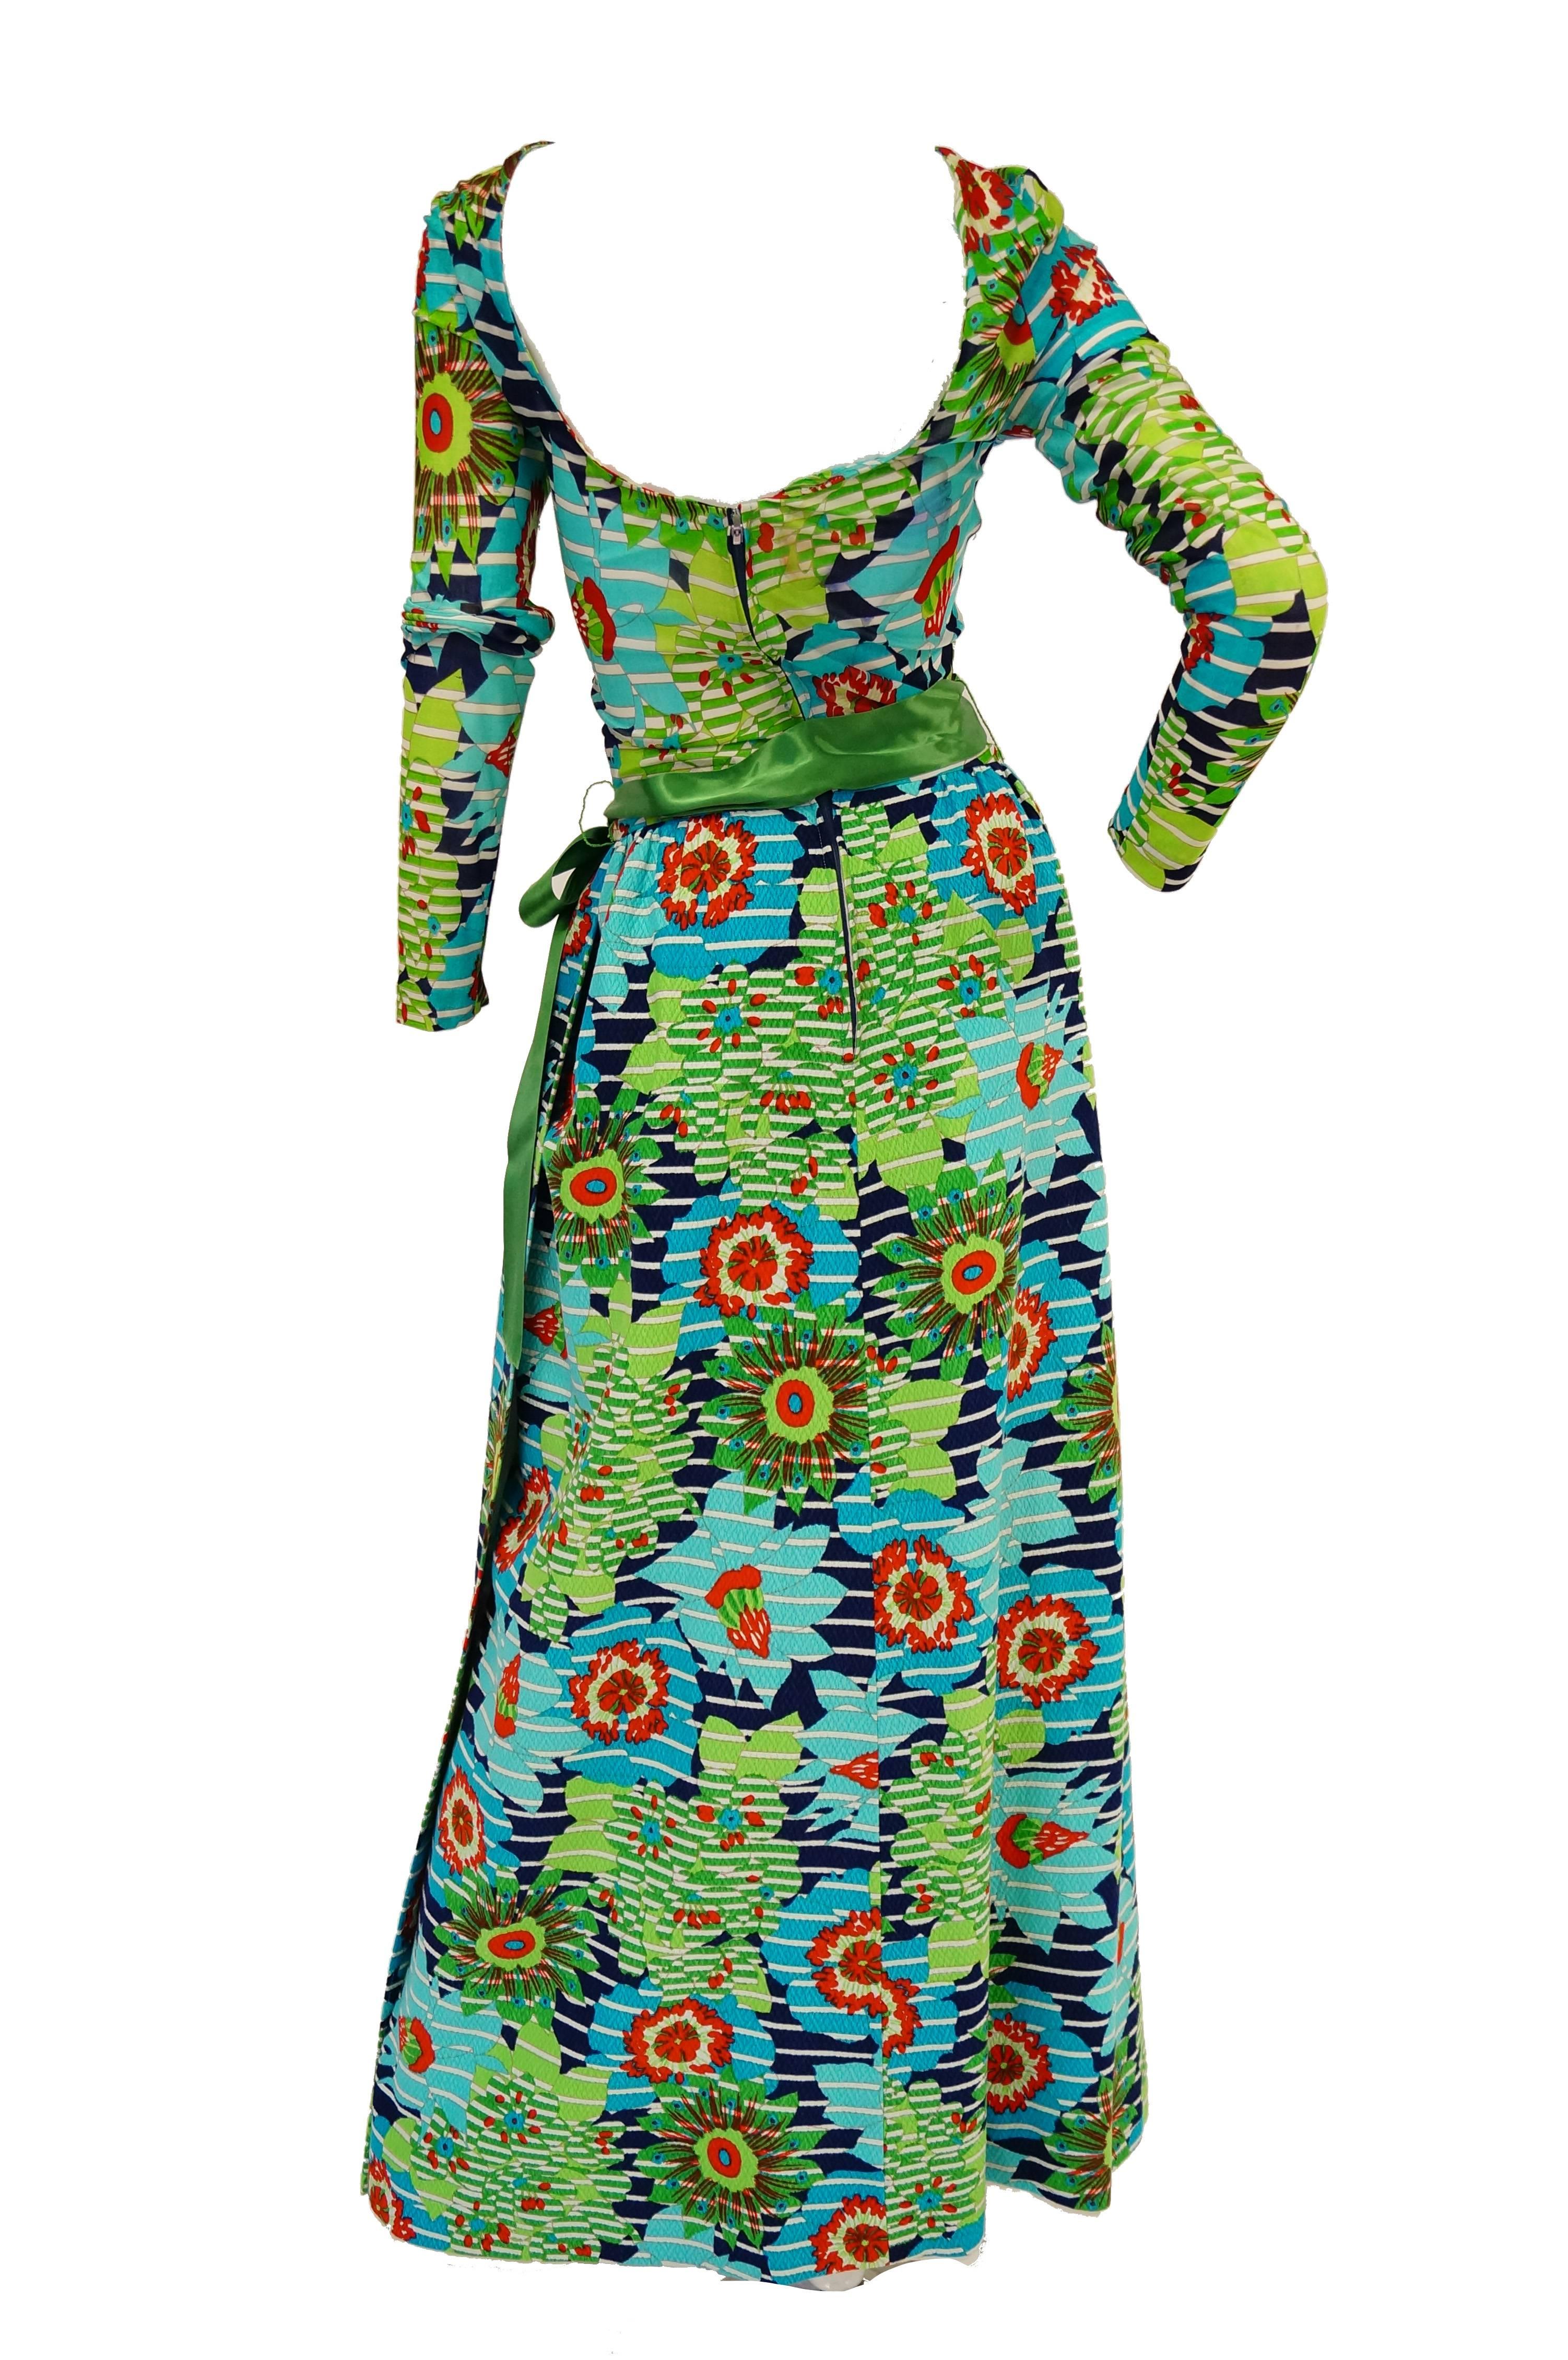 Women's  Lanvin Green and Blue Floral Dress with Sheer Bodice and Scoop Back, 1970s  For Sale